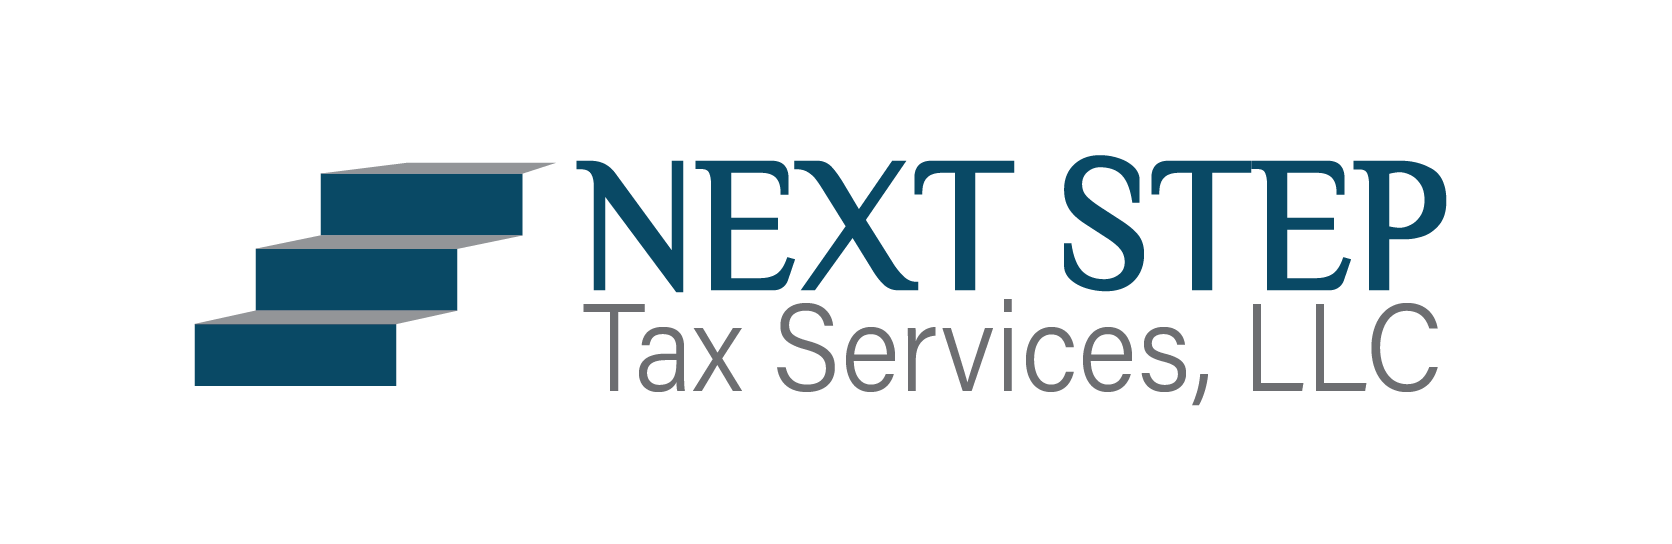 Next Step Taxes: Professional accounting services